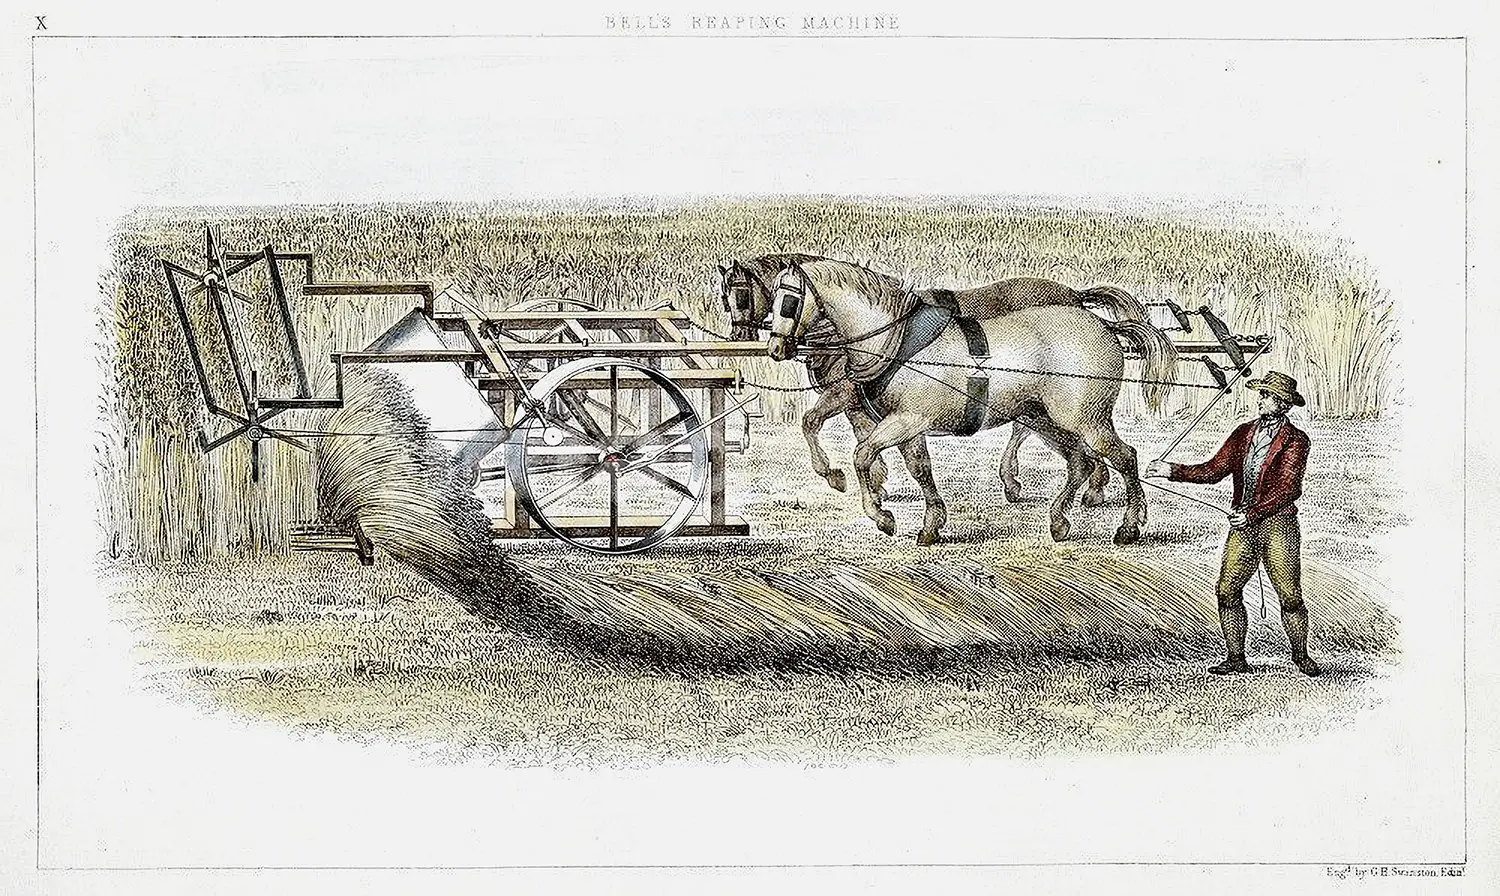 A man operates an elaborate contraption, pushed by two horses, that is reaping a field of wheat.